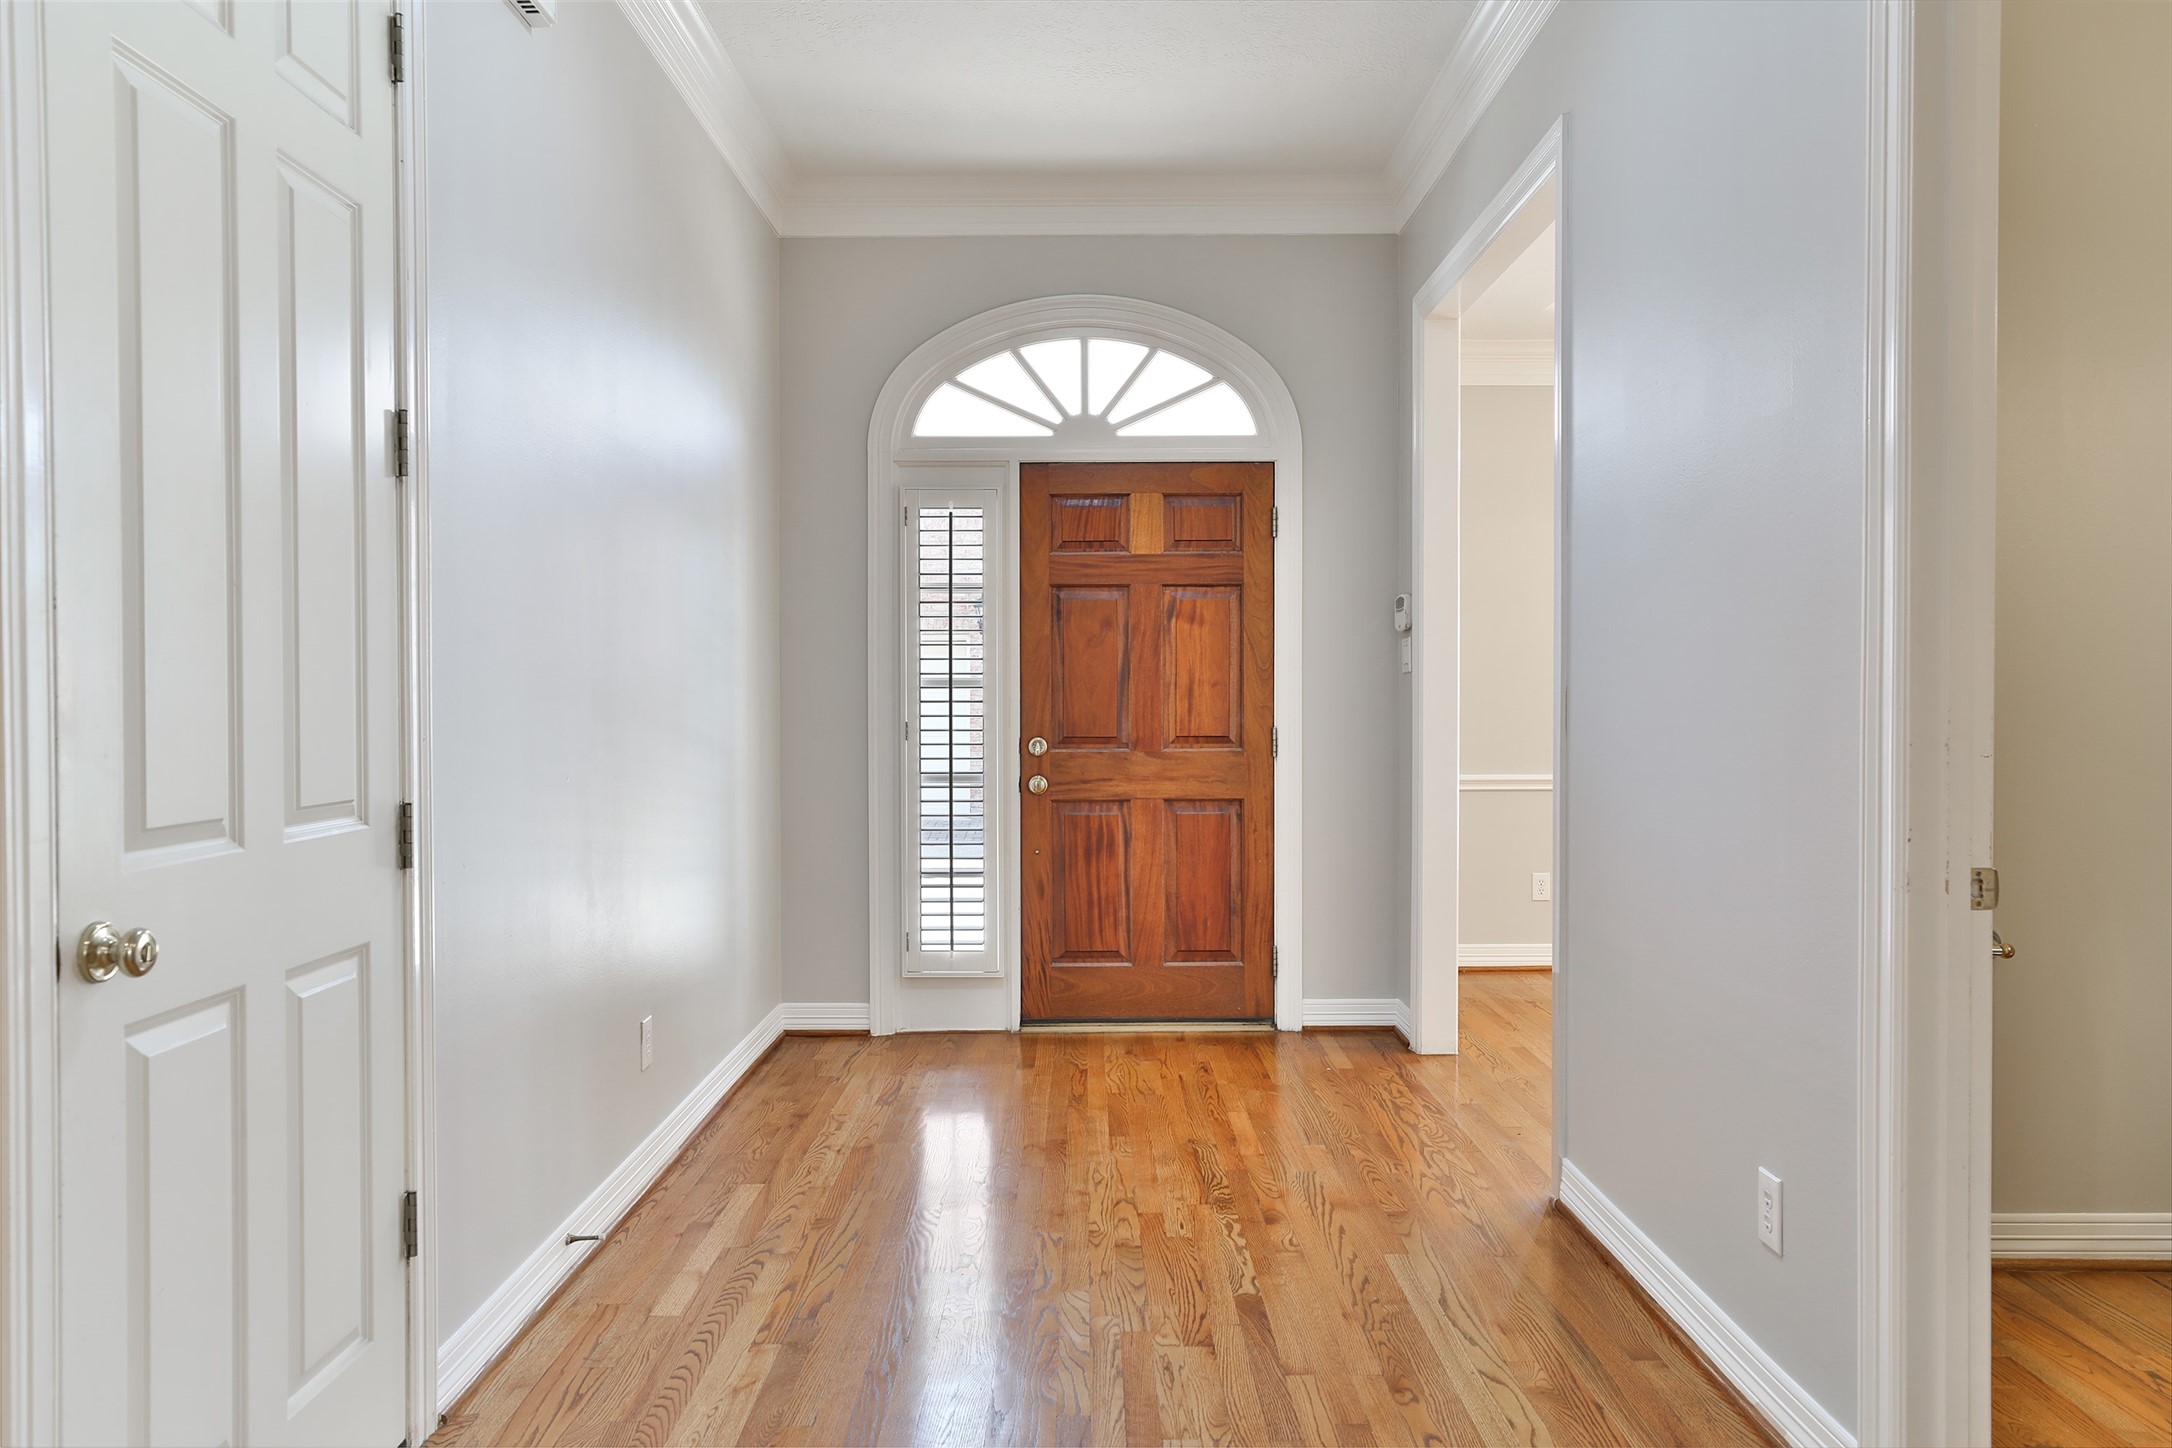 Natural wood floors span the downstairs space.